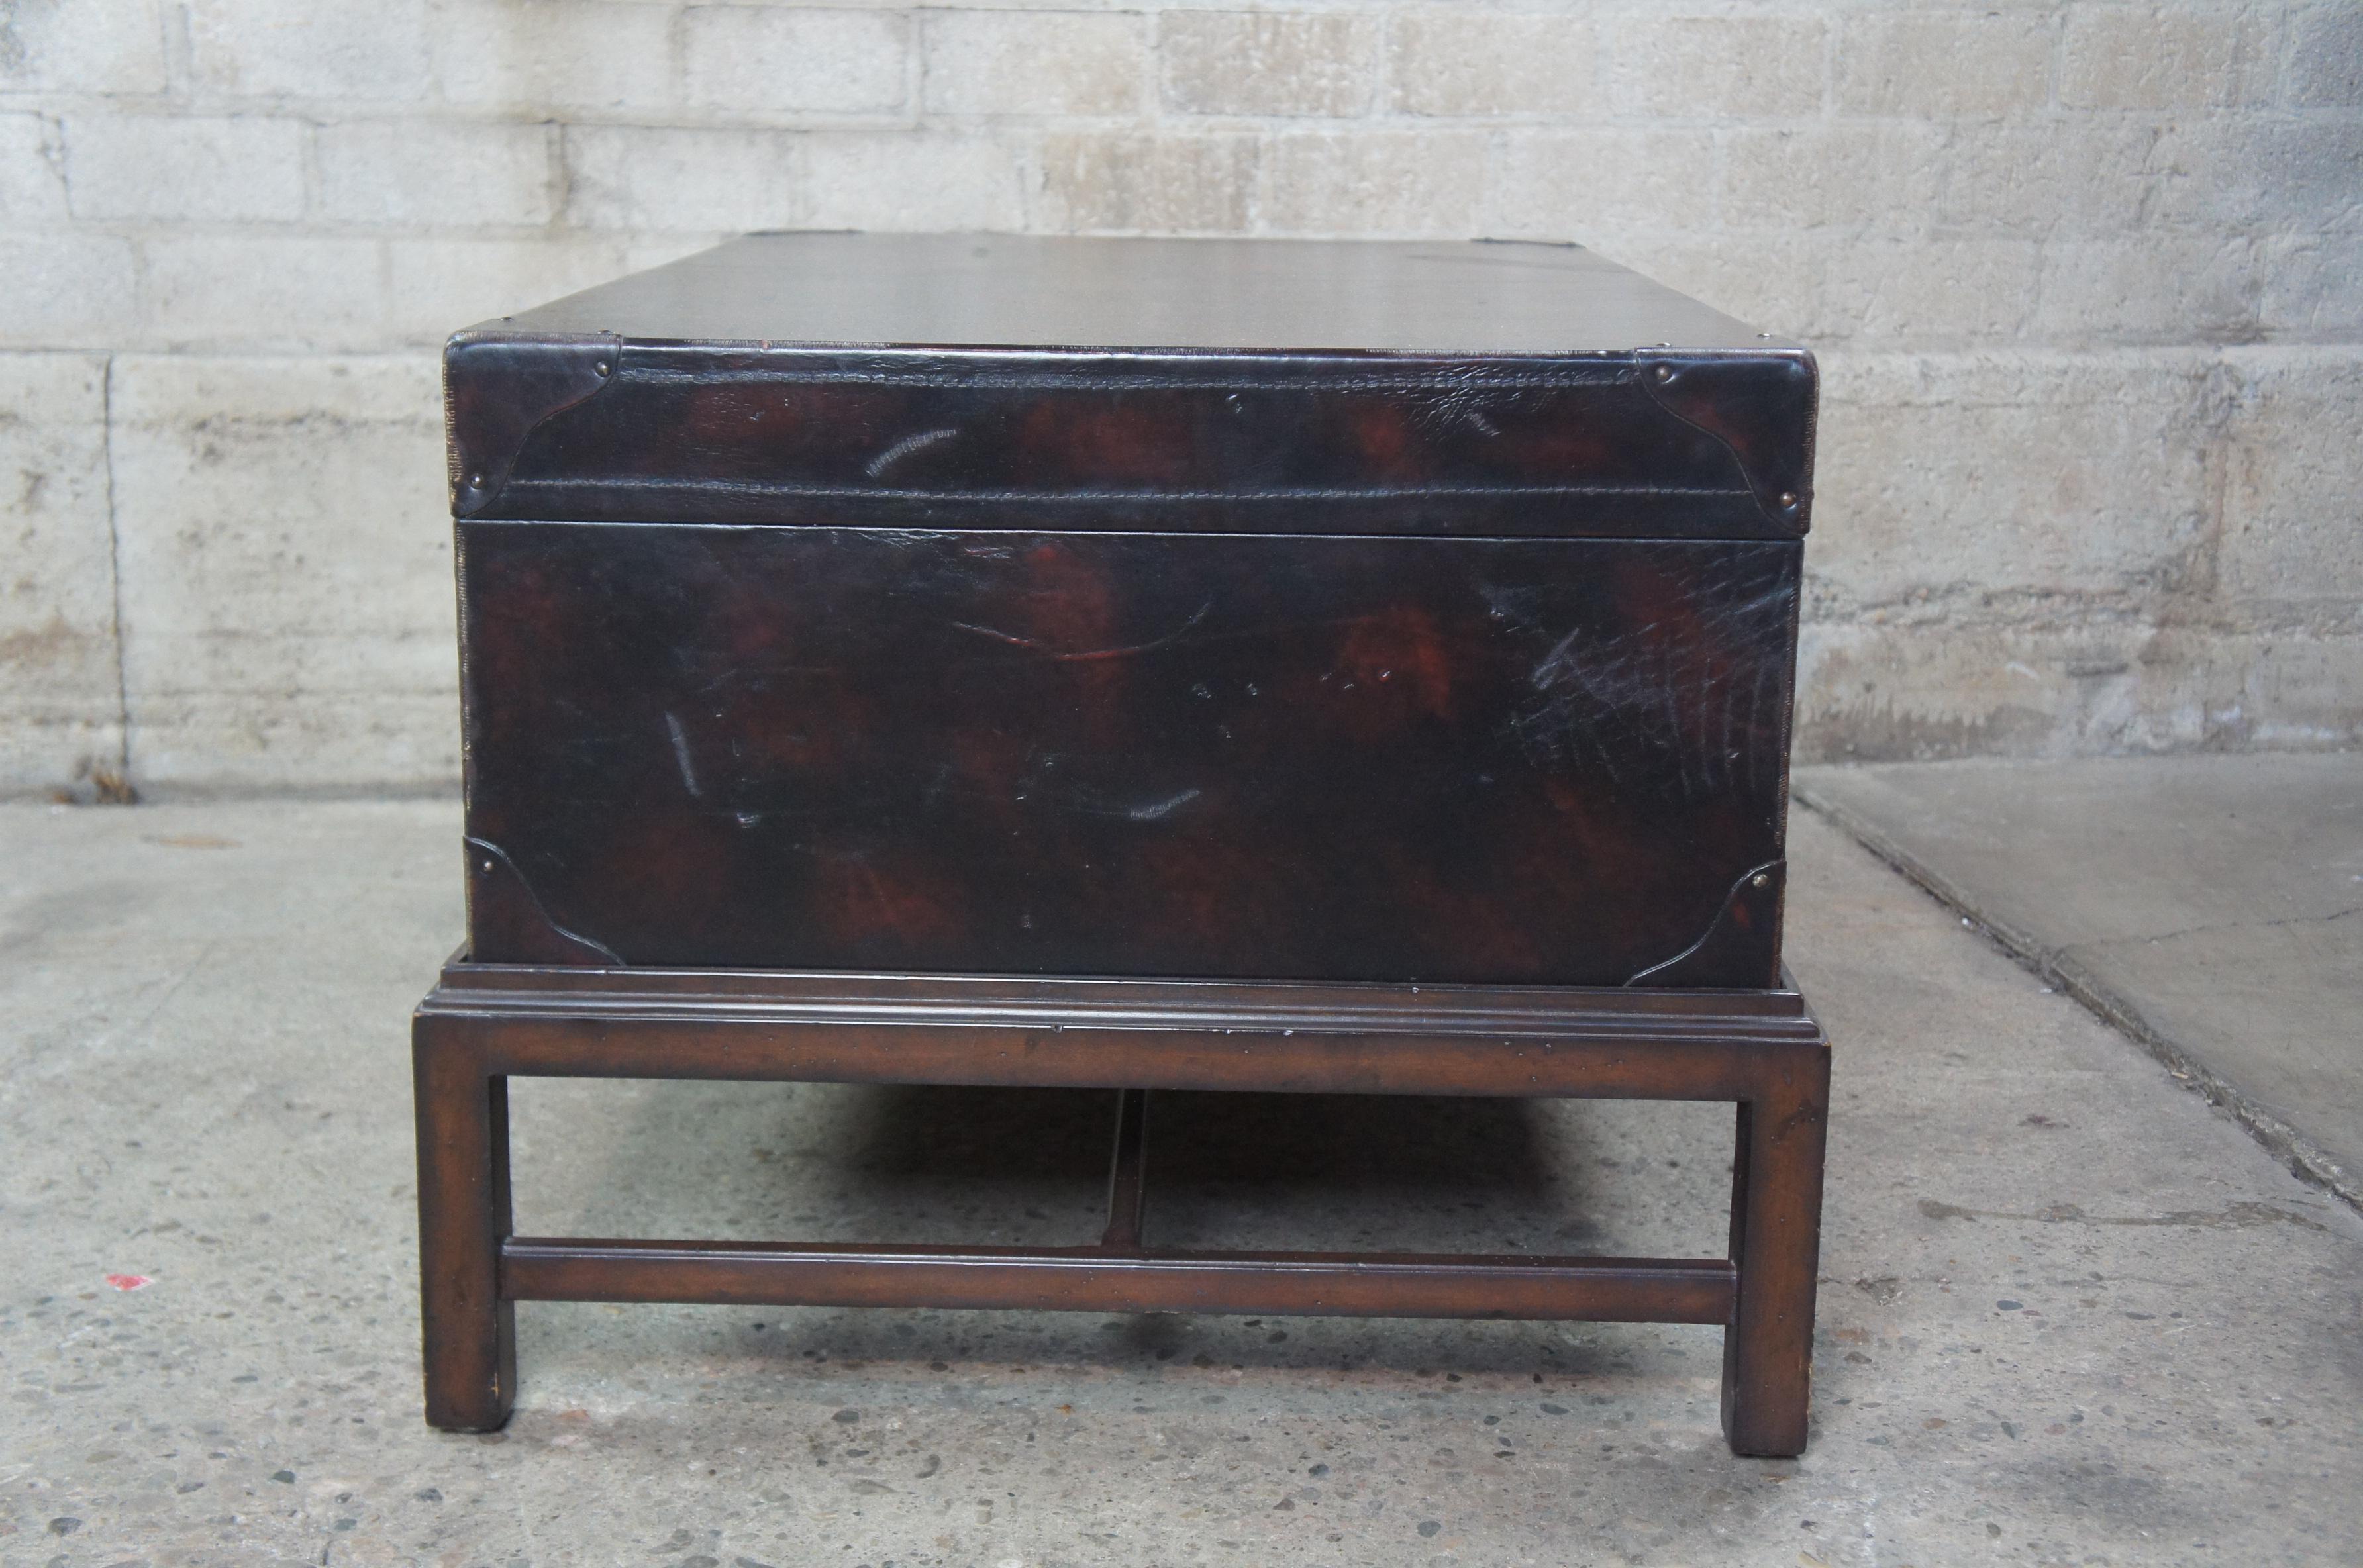 Campaign Ralph Lauren Distressed Leather Steam Trunk Coffee Table on Stand